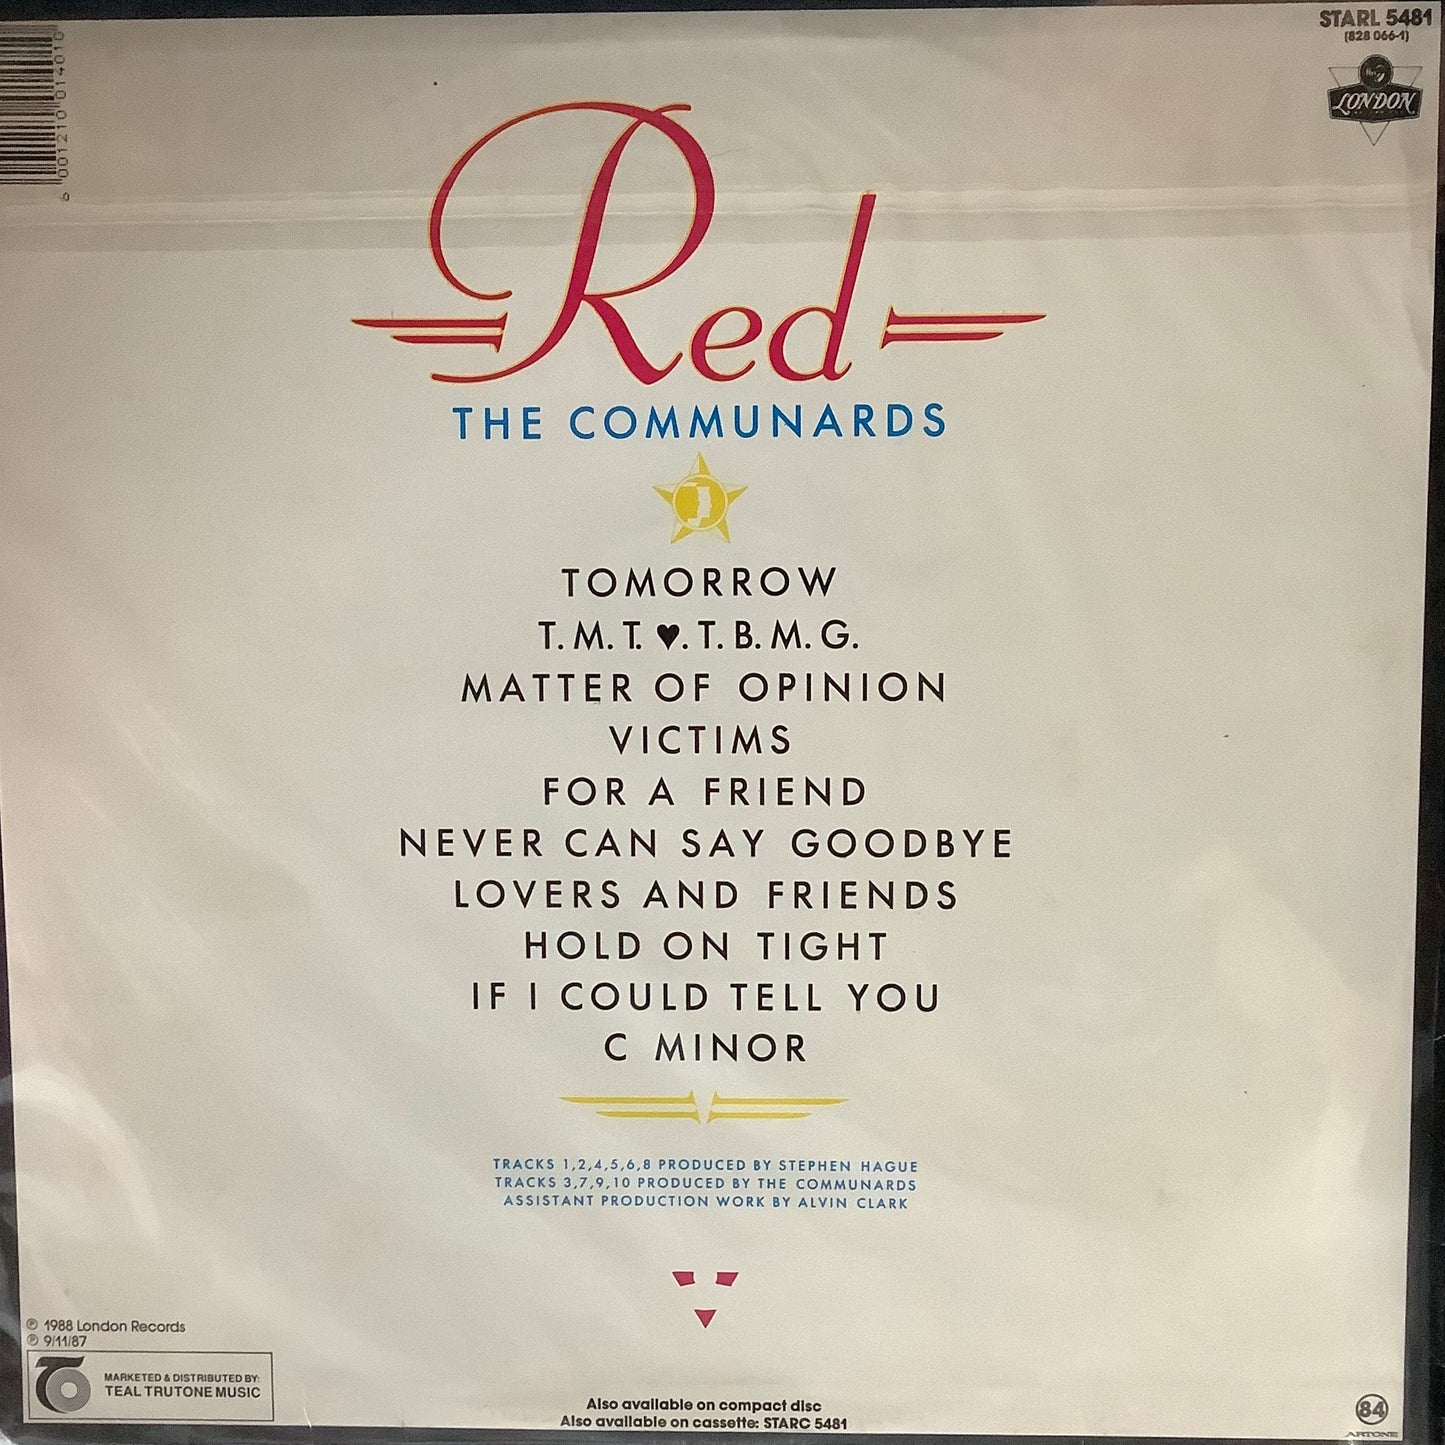 Communards, The - RED